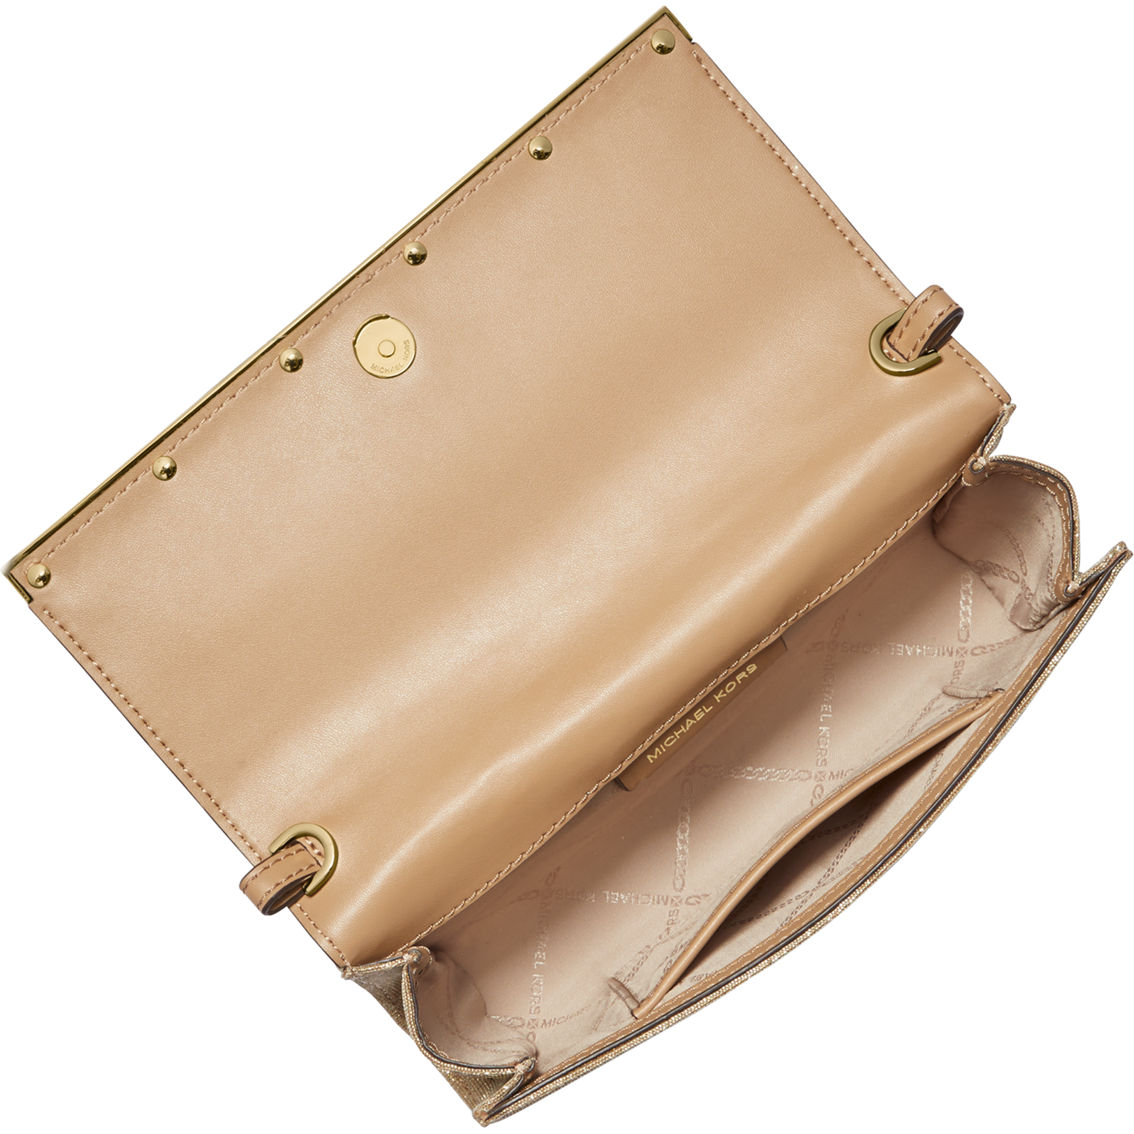 Michael Kors Mona Pale Gold Large East West Clutch - Image 3 of 4